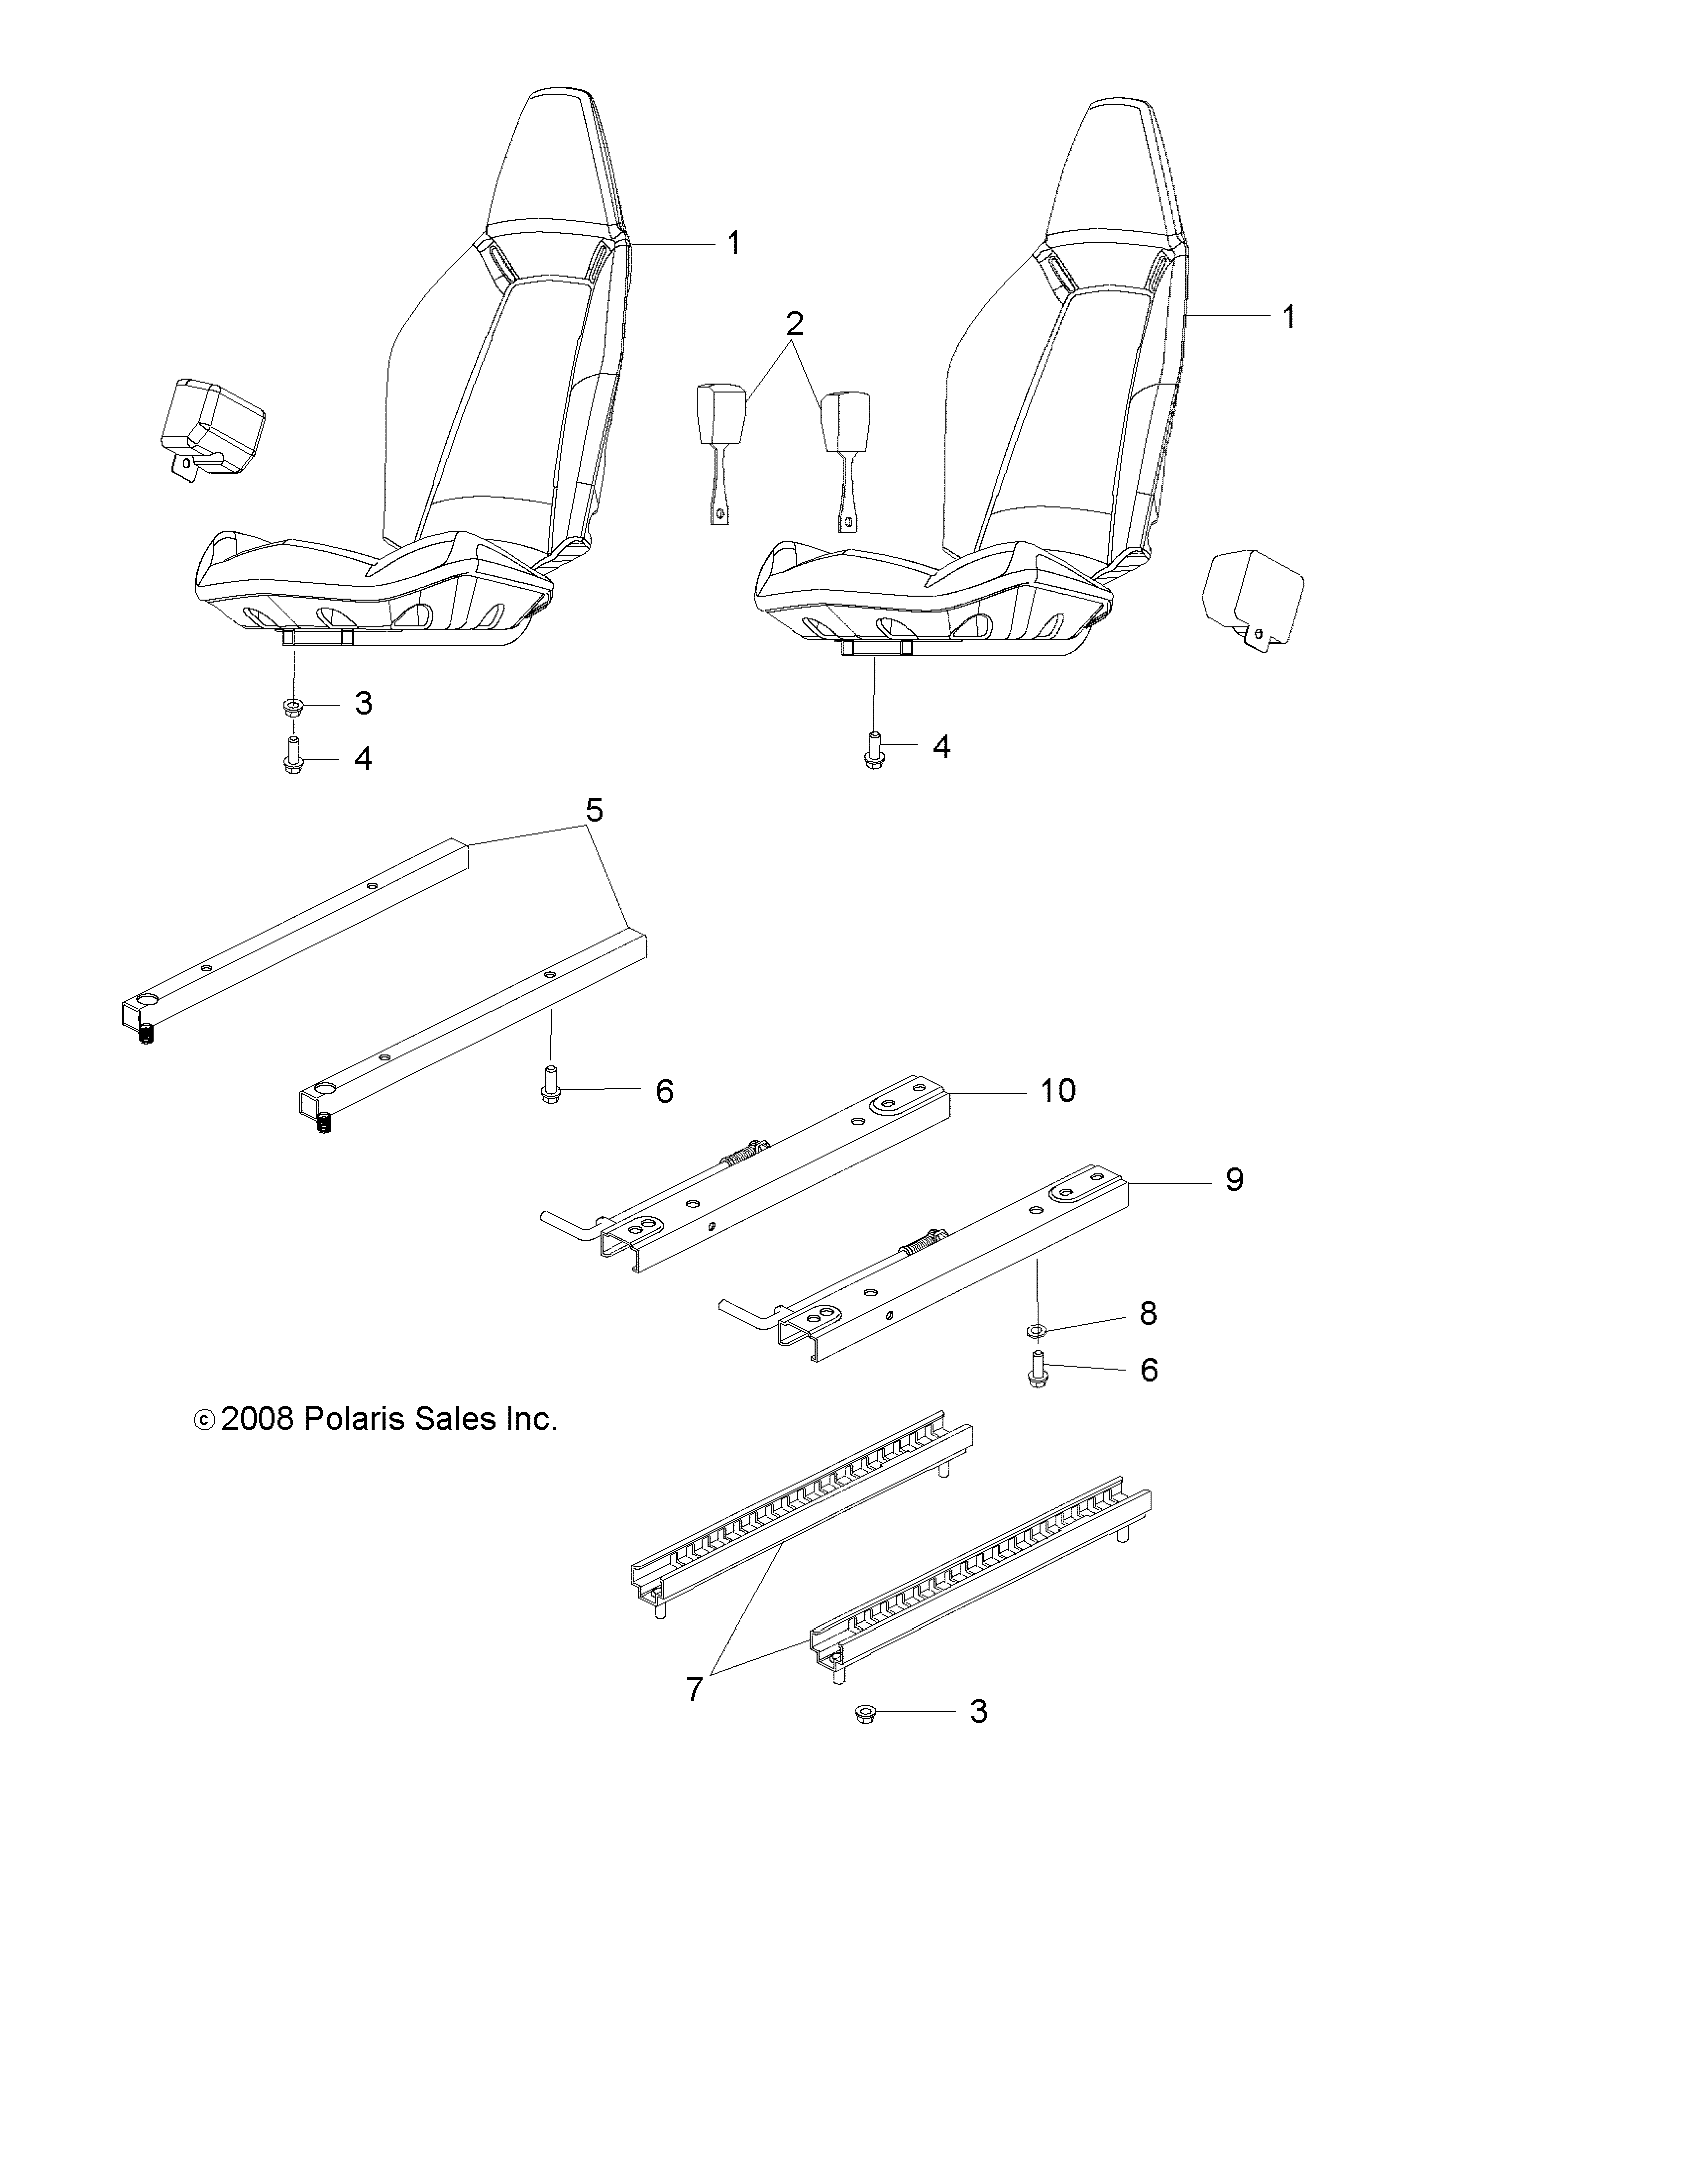 Part Number : 0454387 SEAT GUIDE WITH LEVER  UPPER